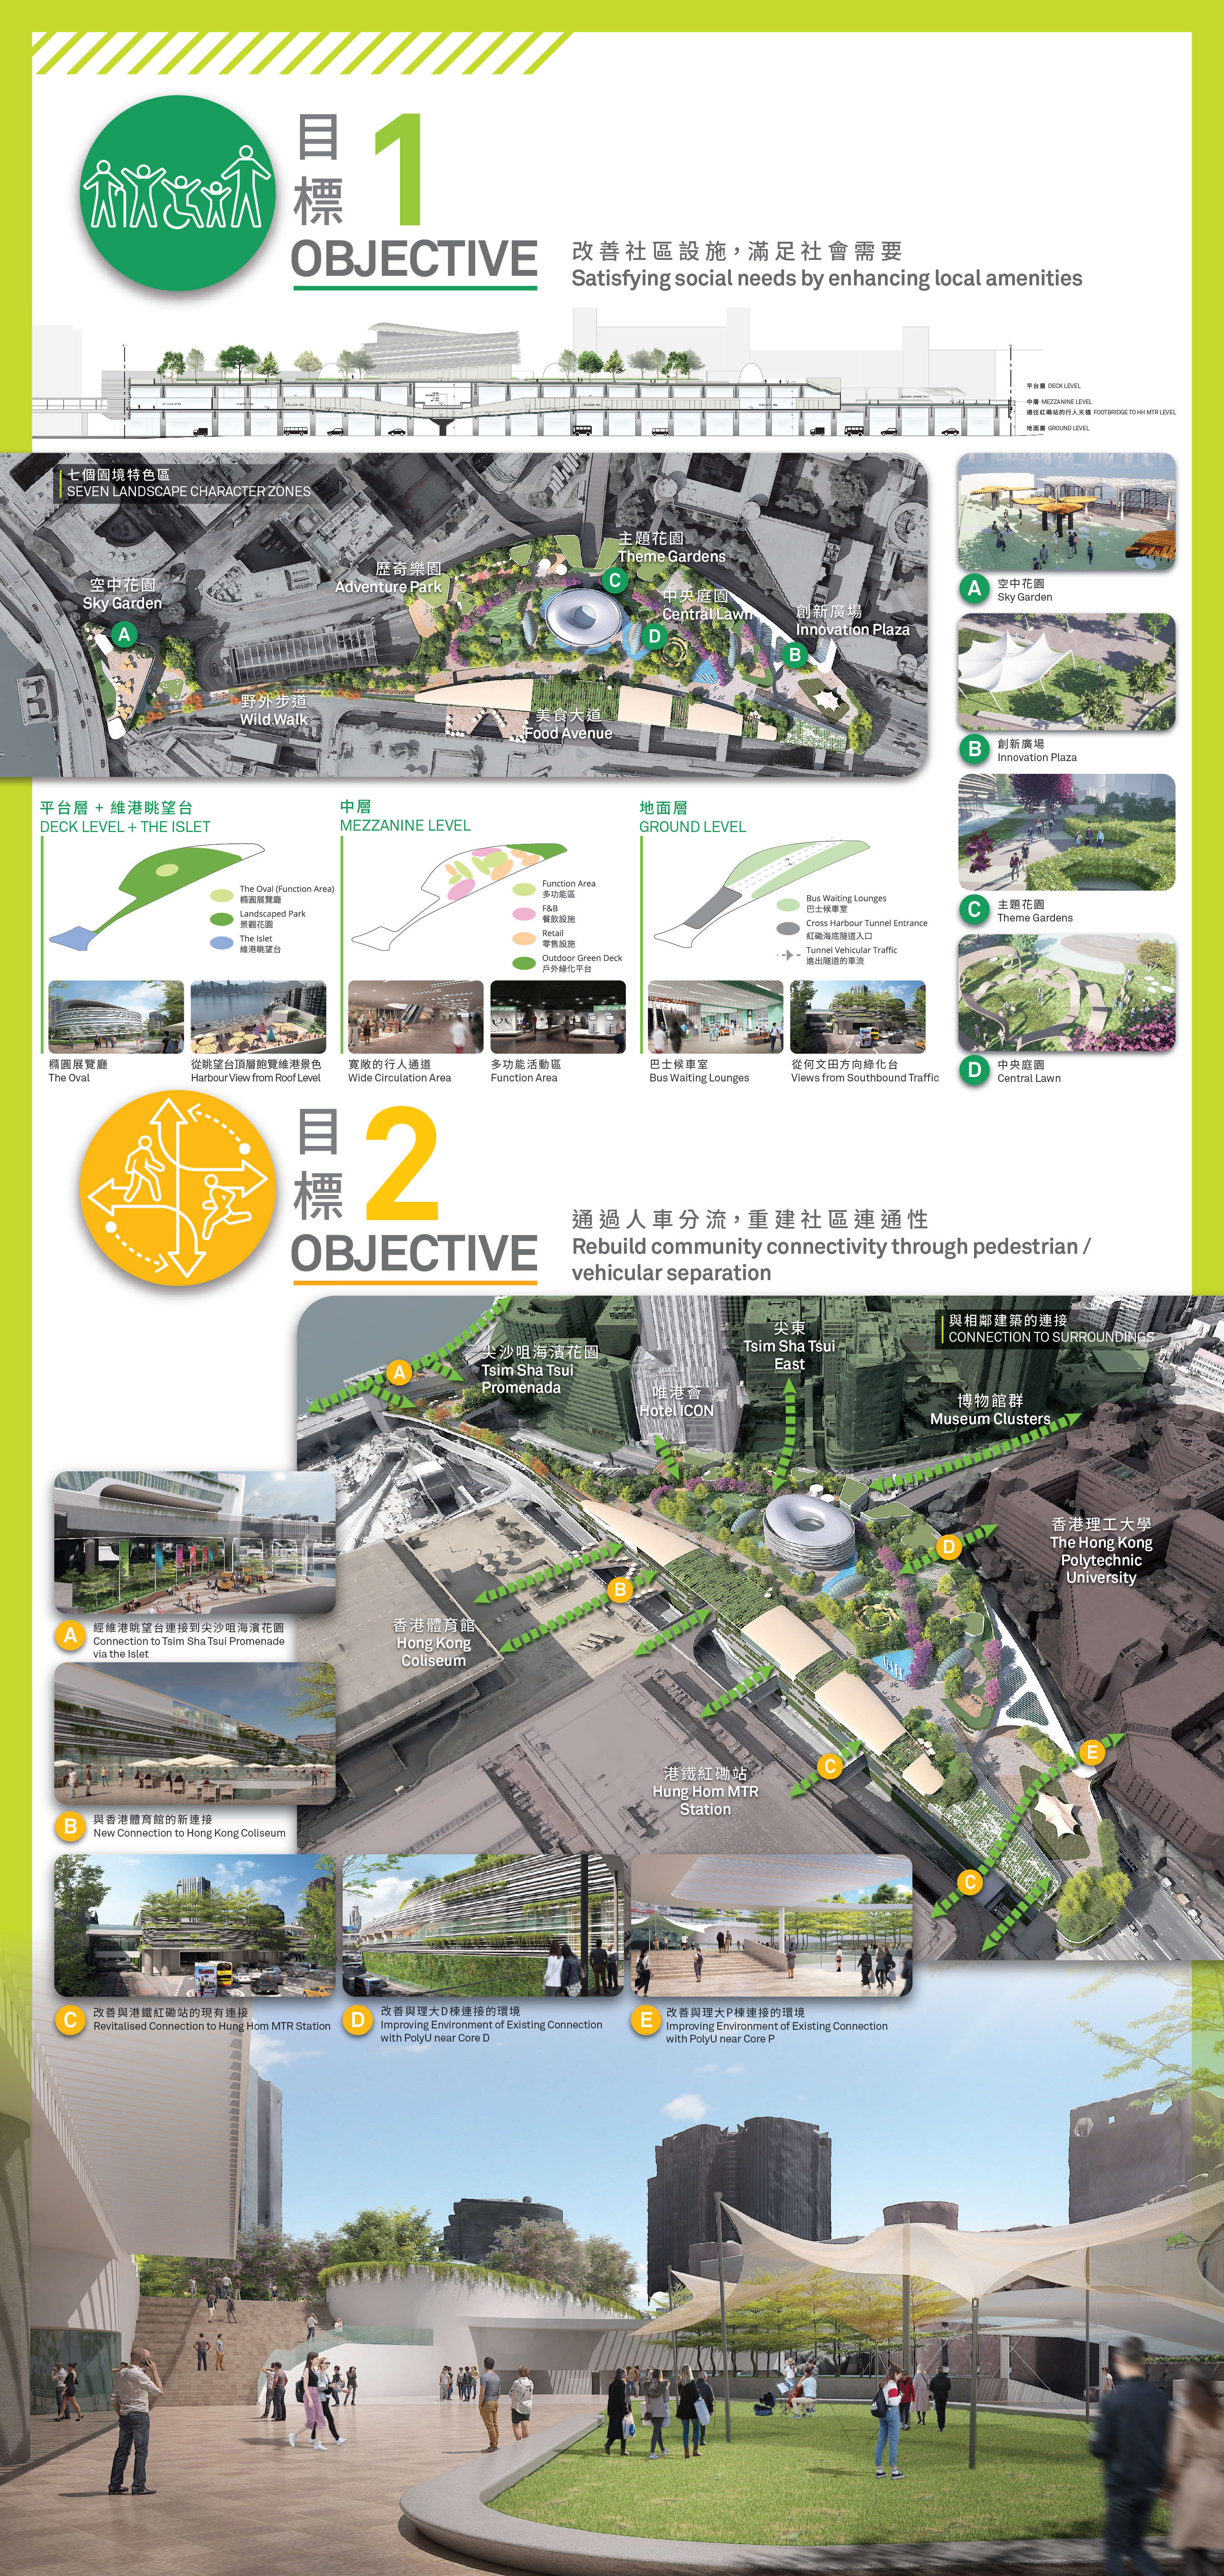 2. Objective 1: Satisfying social needs by enhancing local amenities; Objective 2: Rebuild community connectivity through pedestrian / vehicular separation